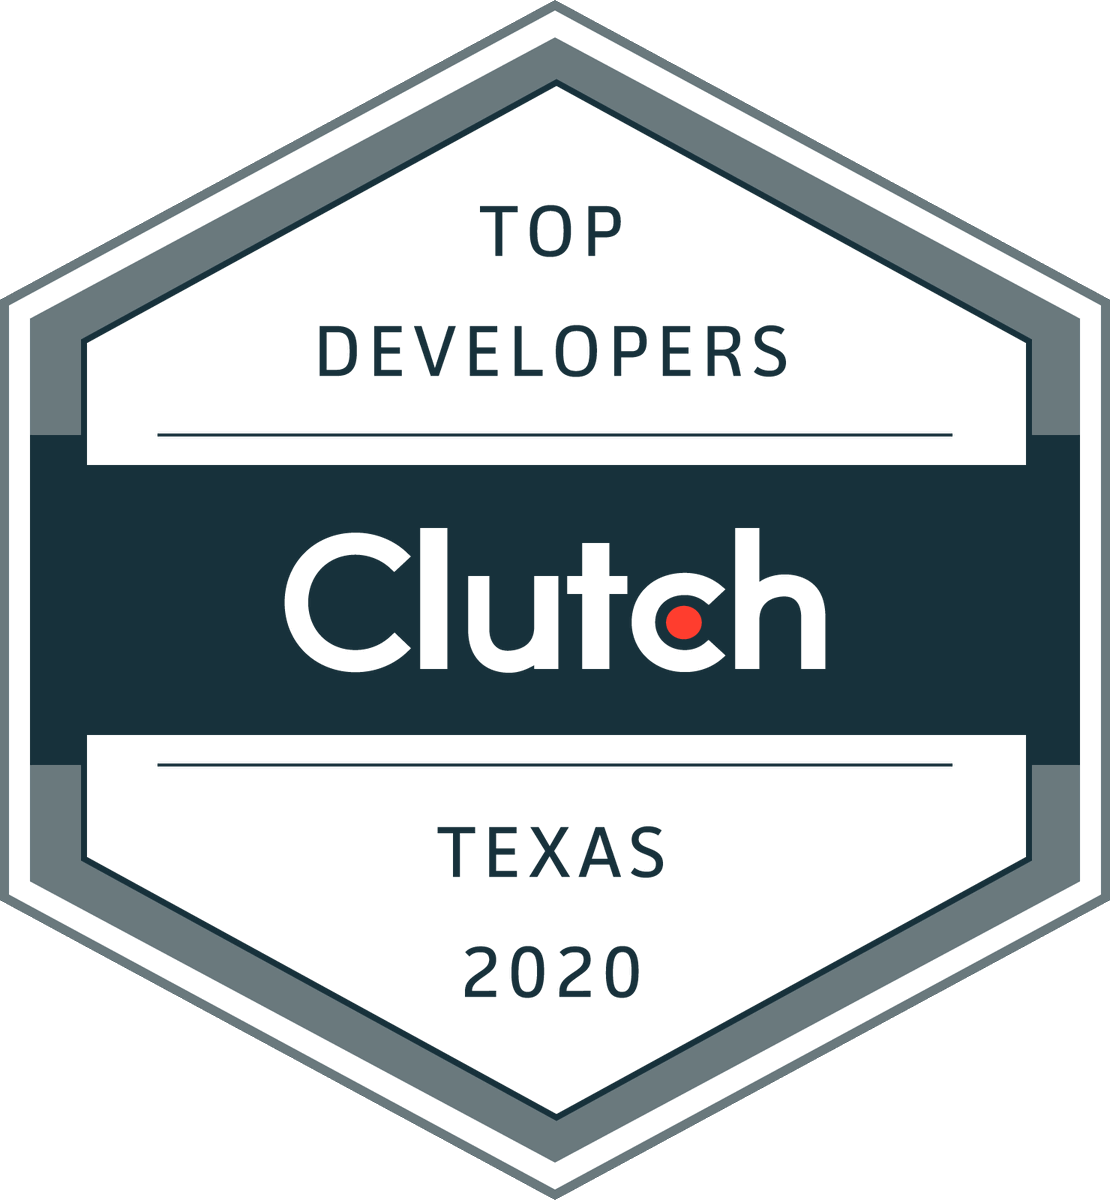 We just received exciting news here at ENGAGENCY! Clutch analyst Emily Koch just notified us that ENGAGENCY was listed as one of Texas’s top web developers for 2020!